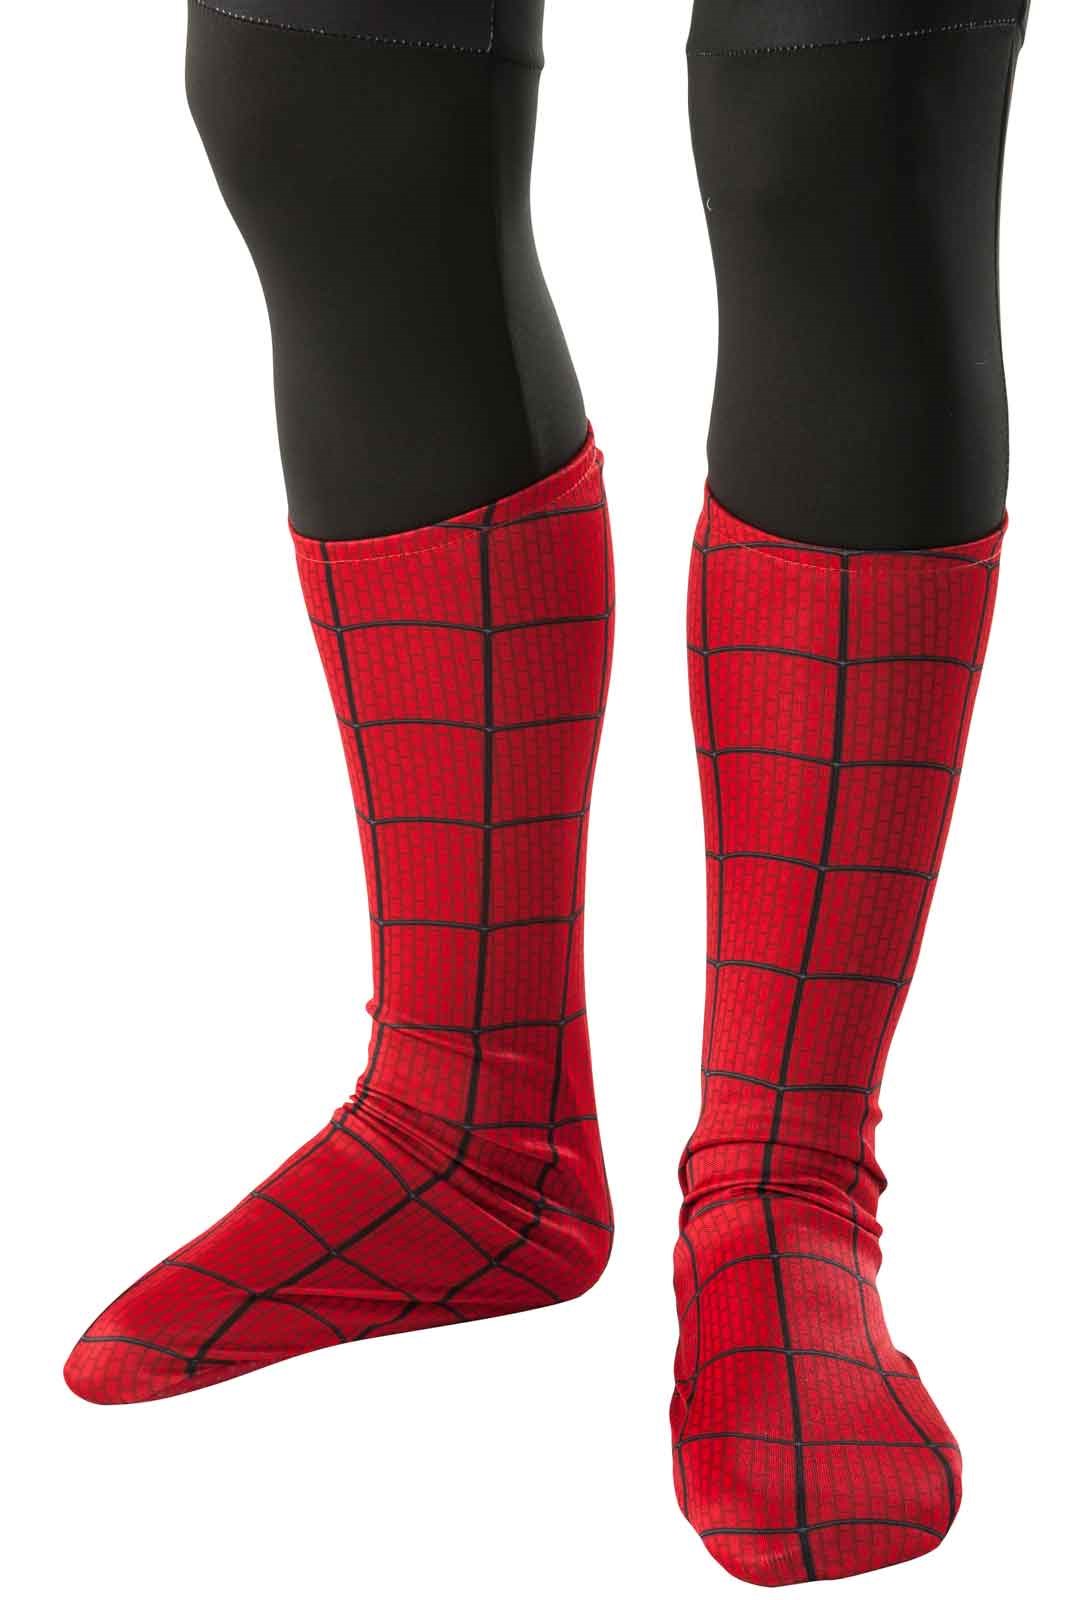 New Official The Amazing Spider-Man 2 Movie Kids BootTops